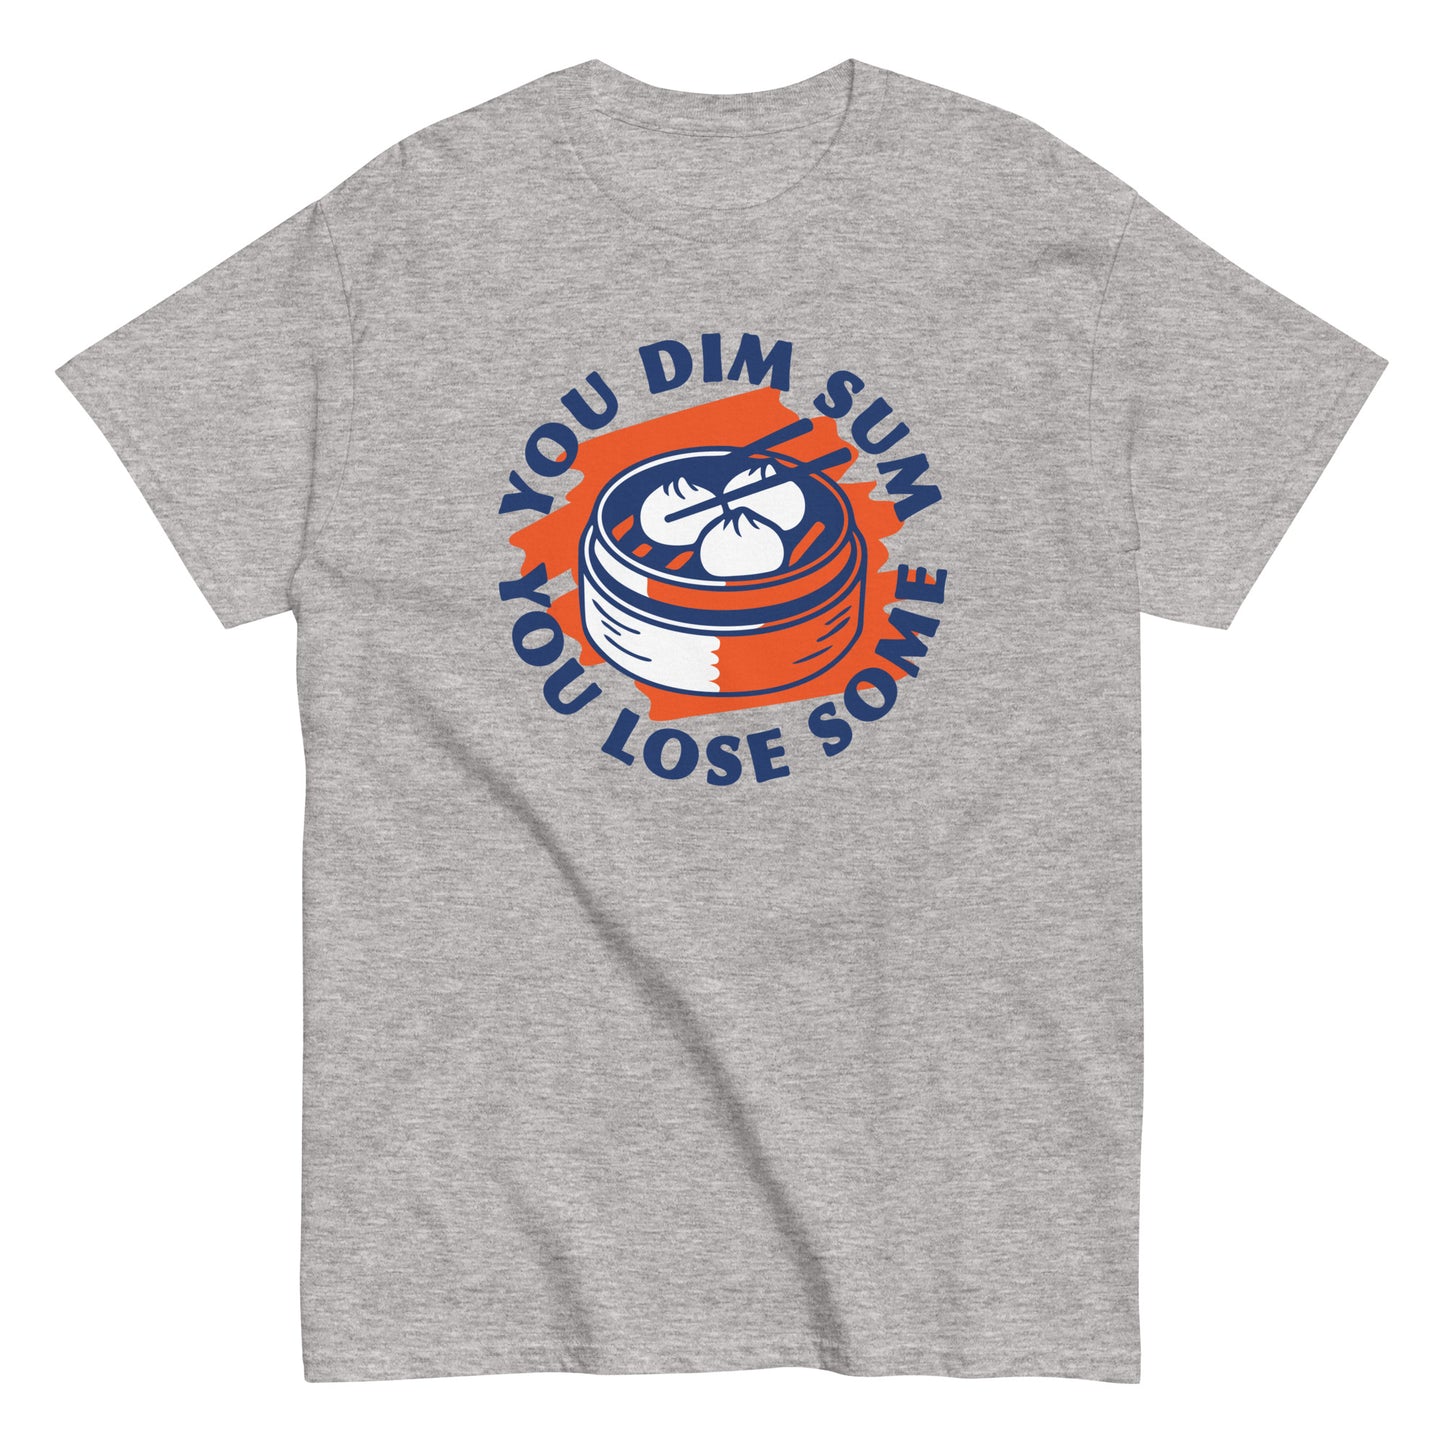 You Dim Sum You Lose Some Men's Classic Tee